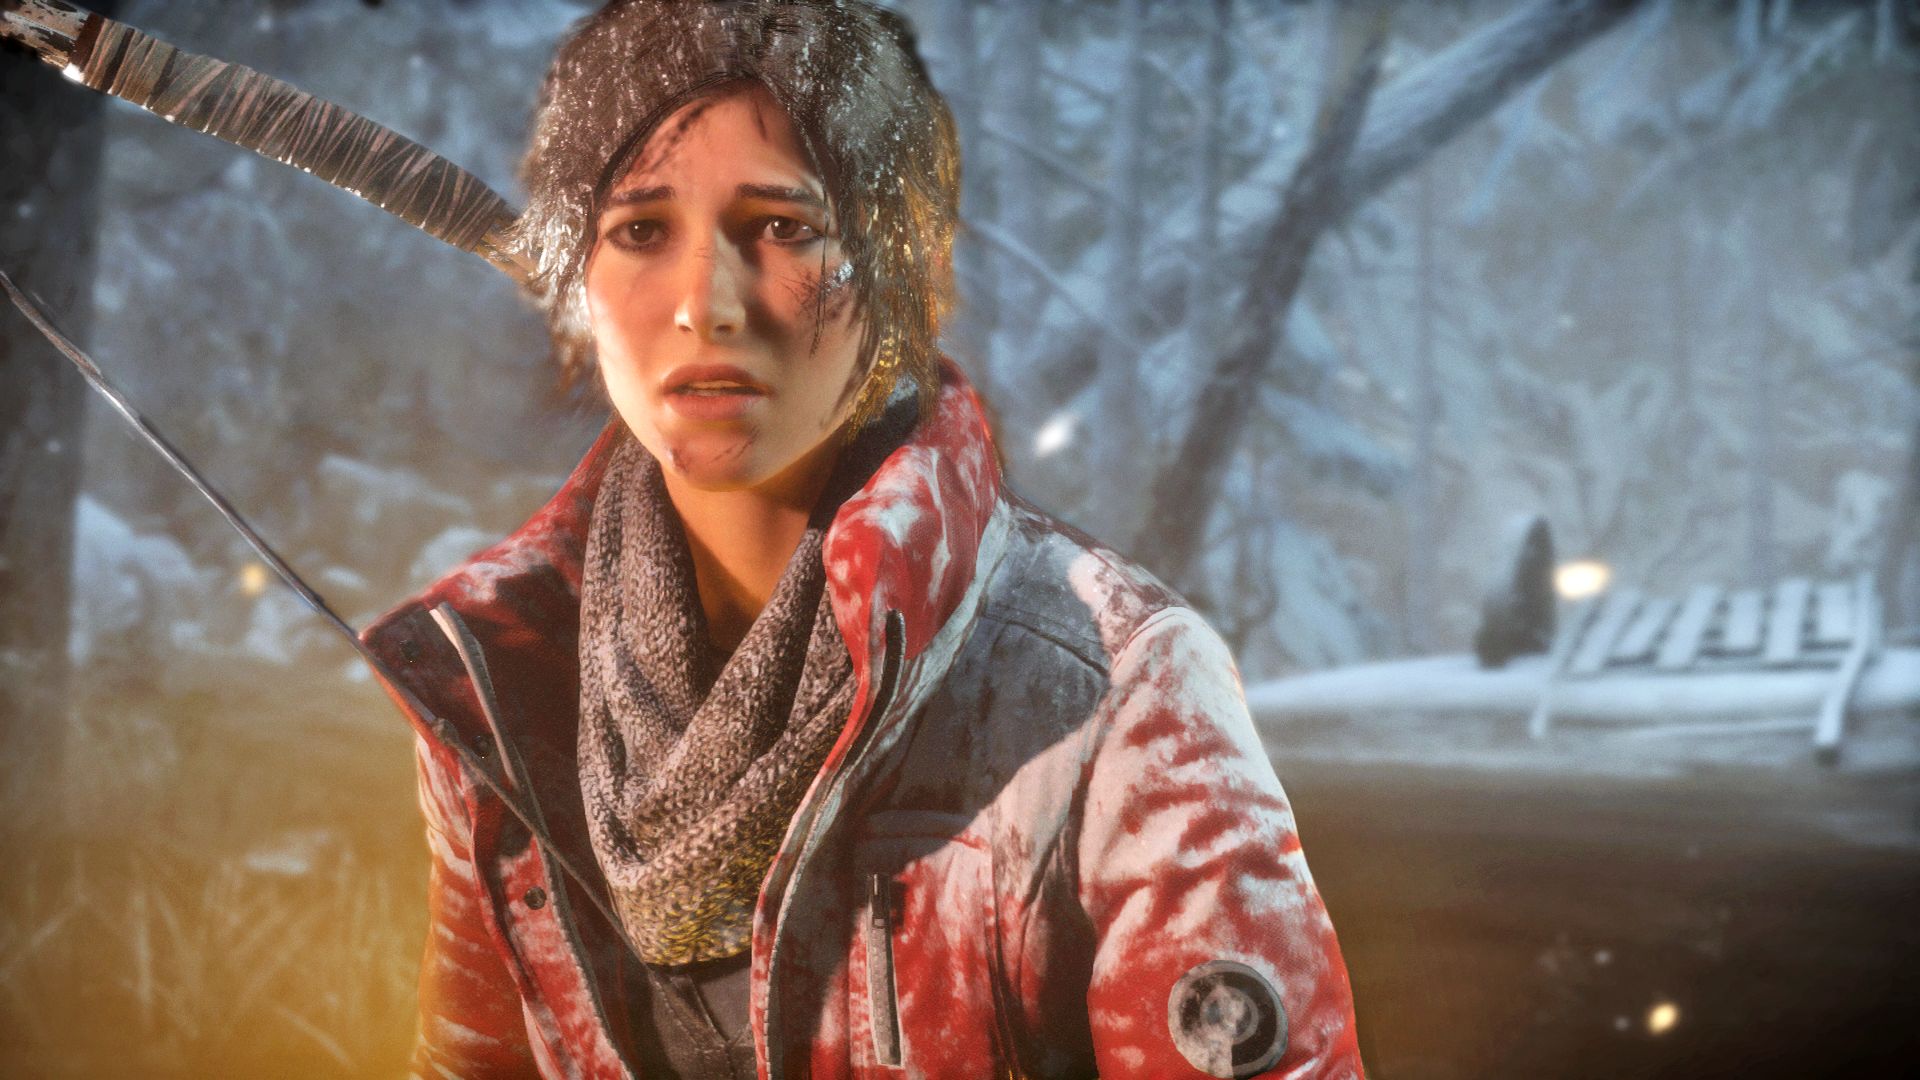 Rise of the Tomb Raider launches this holiday season exclusively for Xbox One and Xbox 360, with the latter version being developed by Nixxes Software.